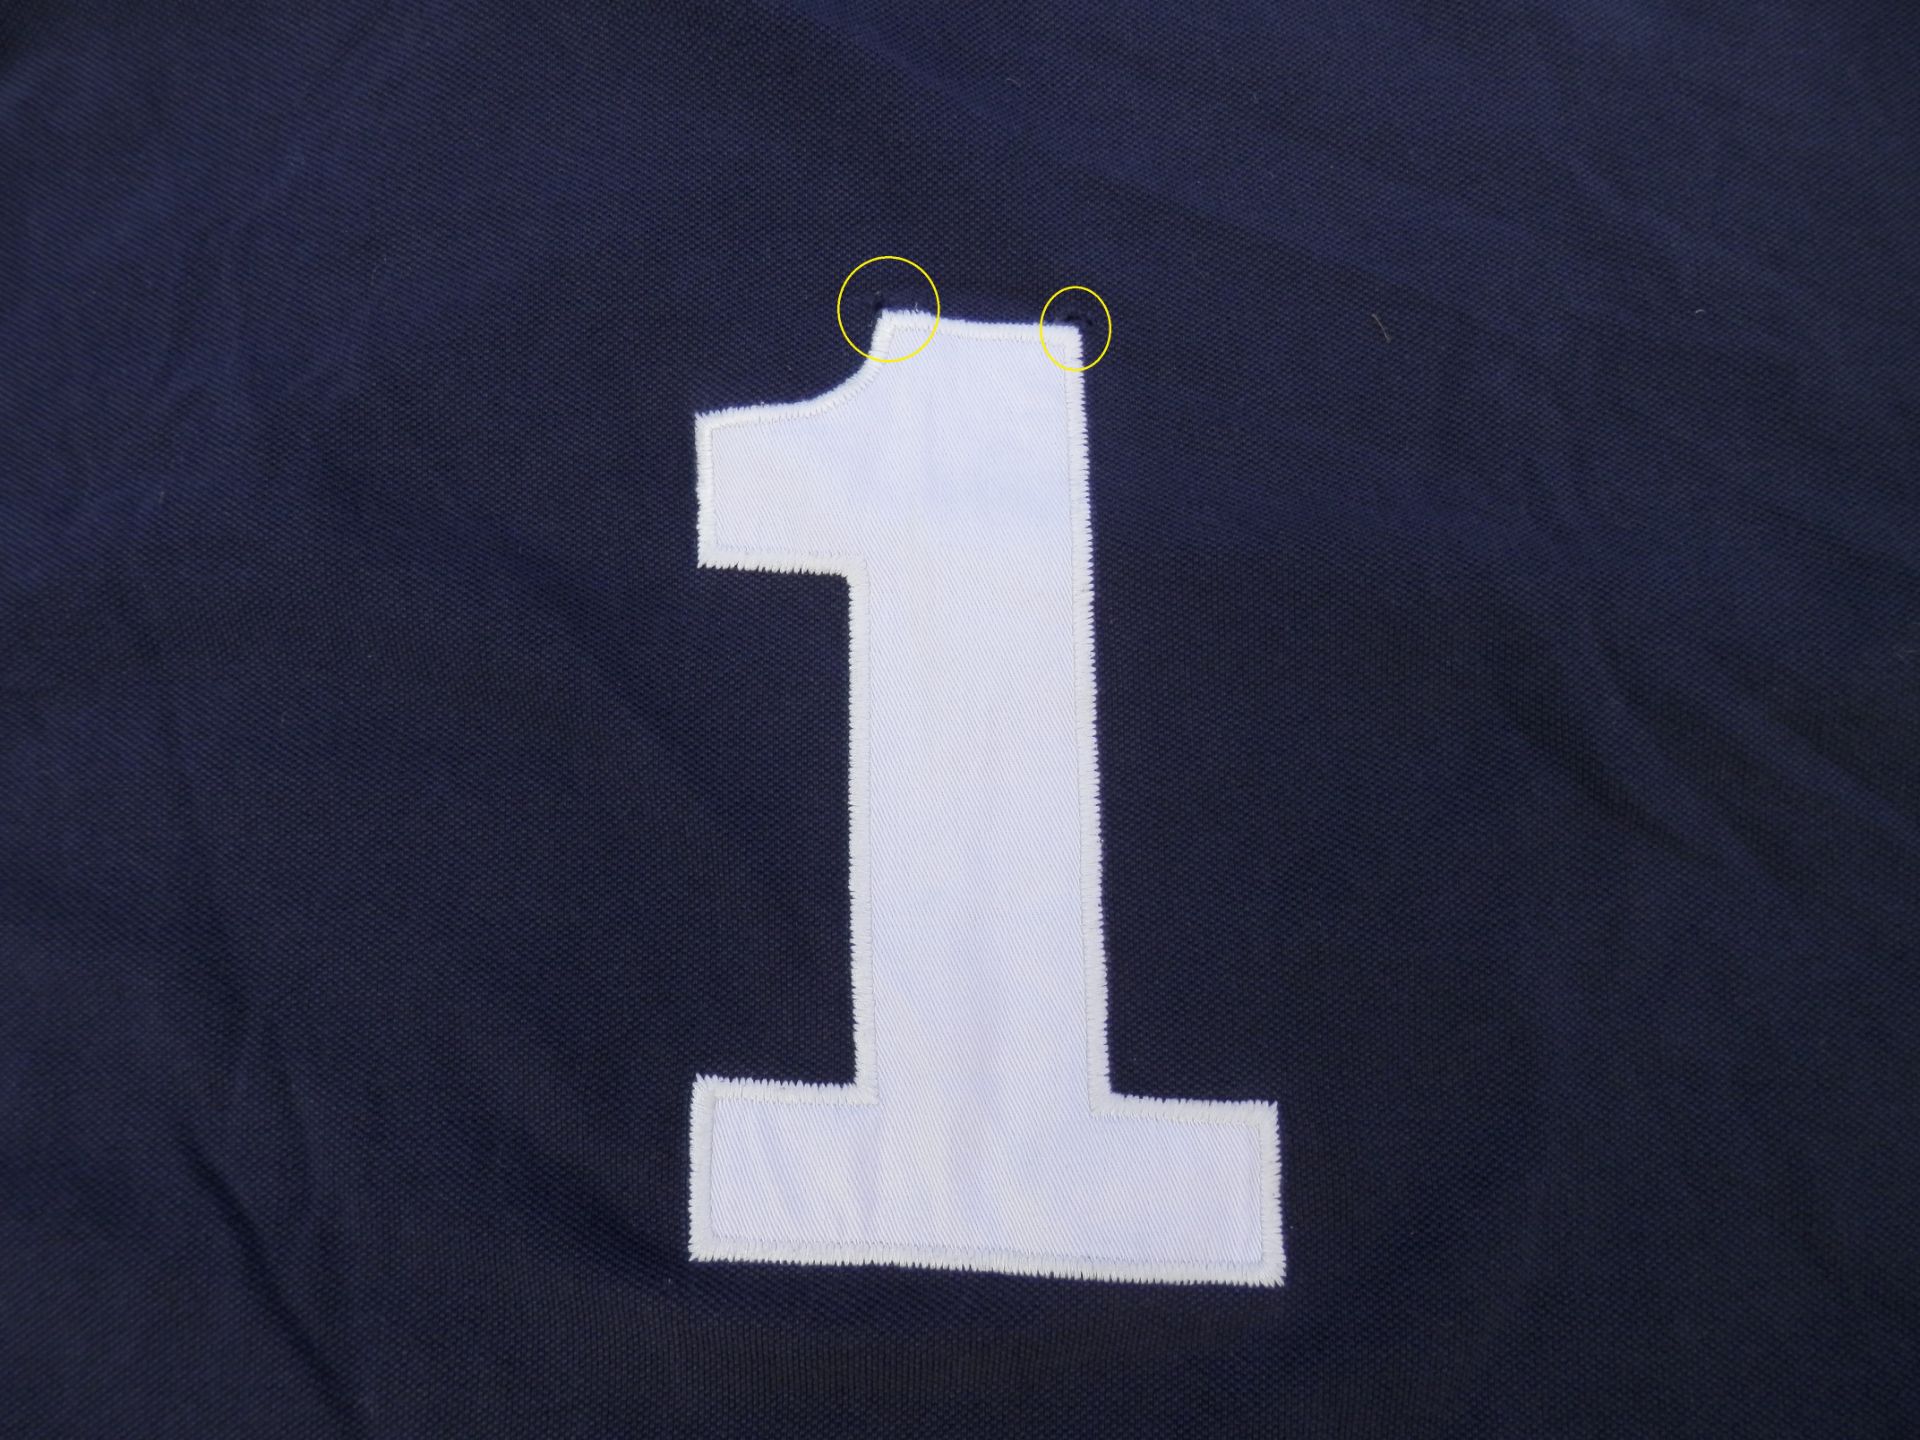 GENTS USED HACKETT POLO SHIRT IN XL, BLUE & WHITE, NO1. USED CONDITION. - Image 6 of 6